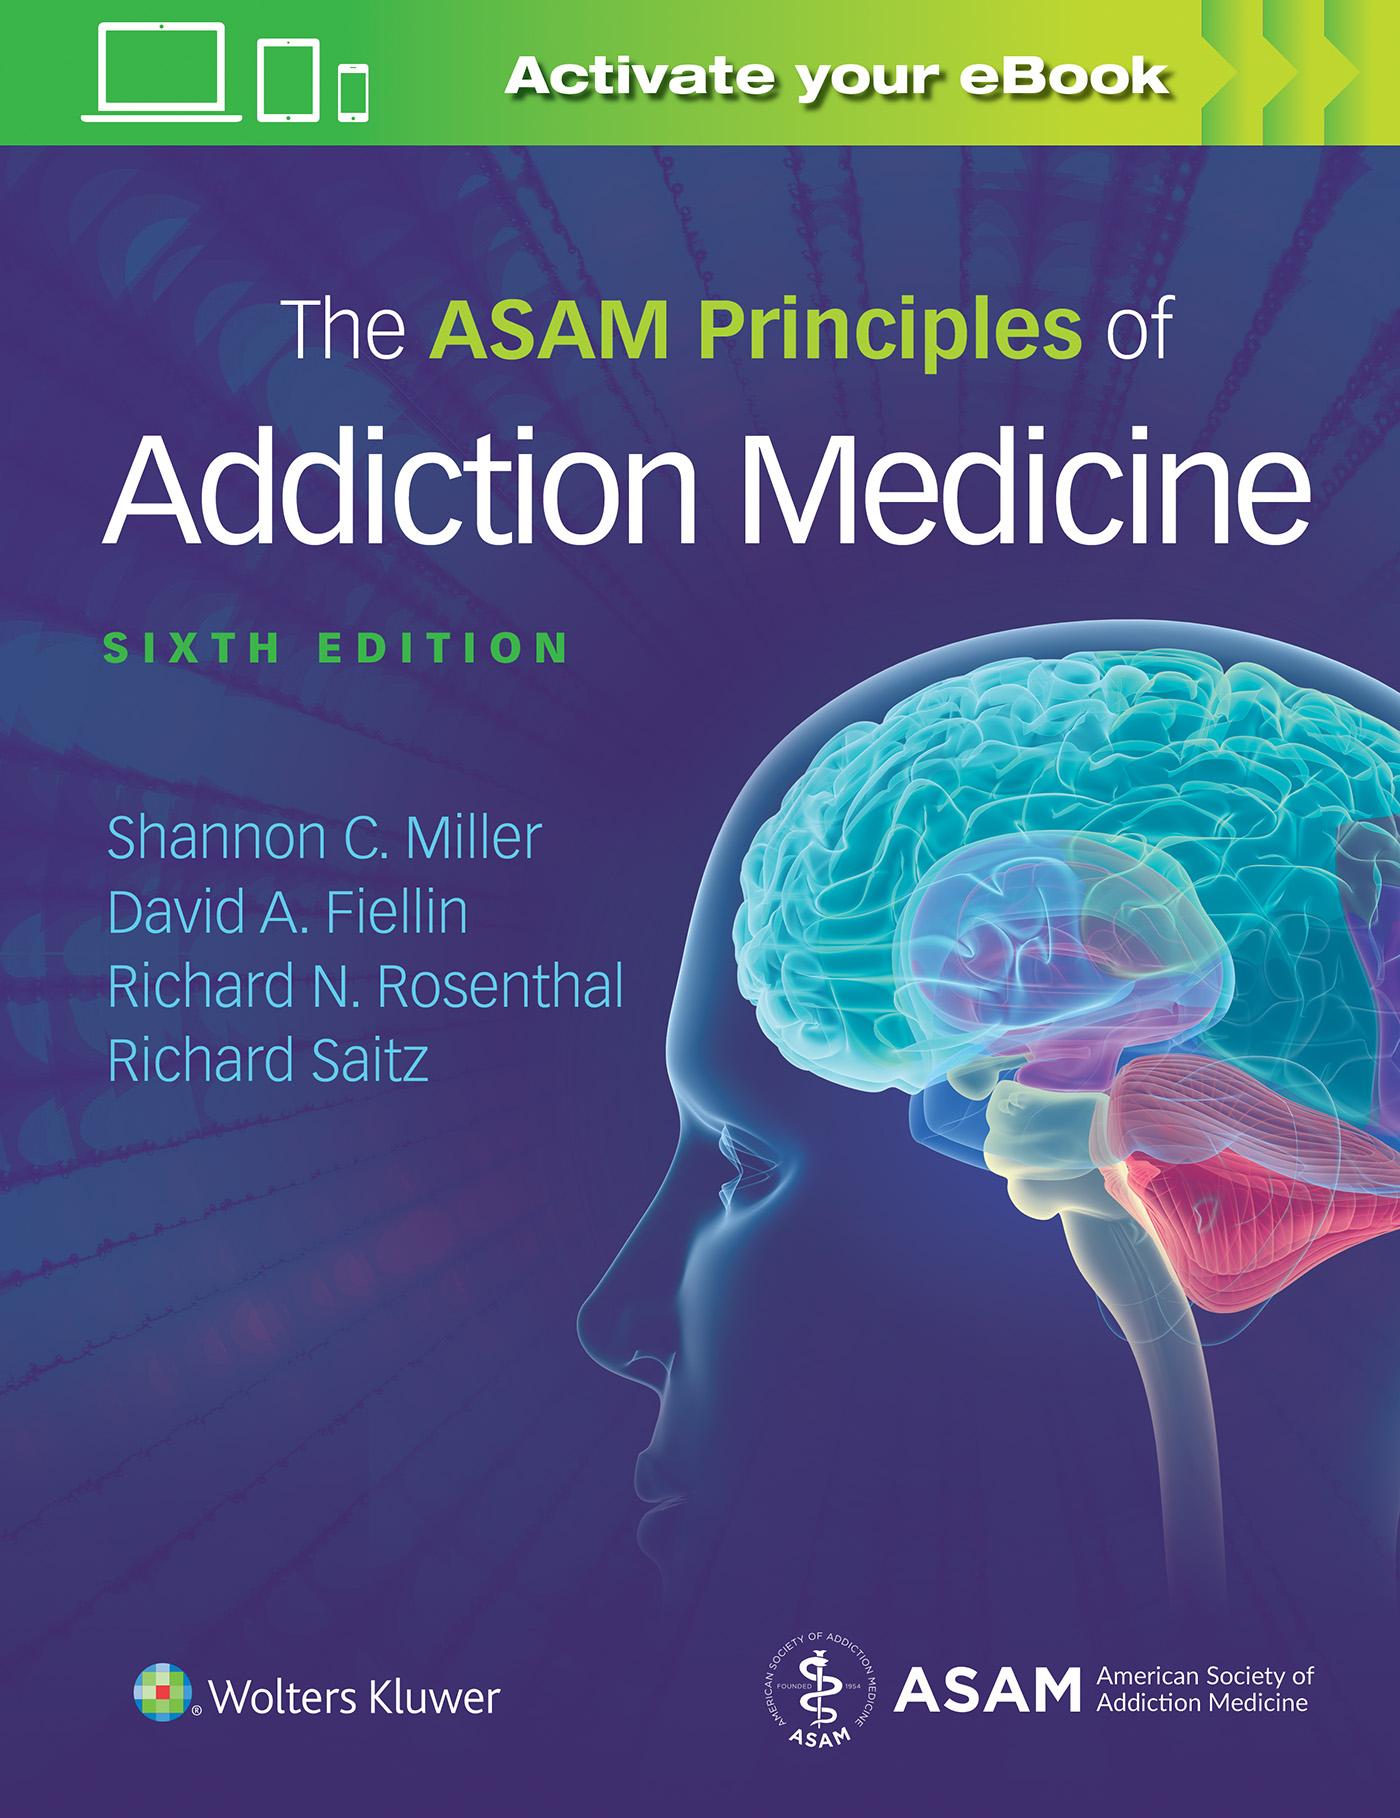 The ASAM Principles of Addiction Medicine Shannon Miller Author